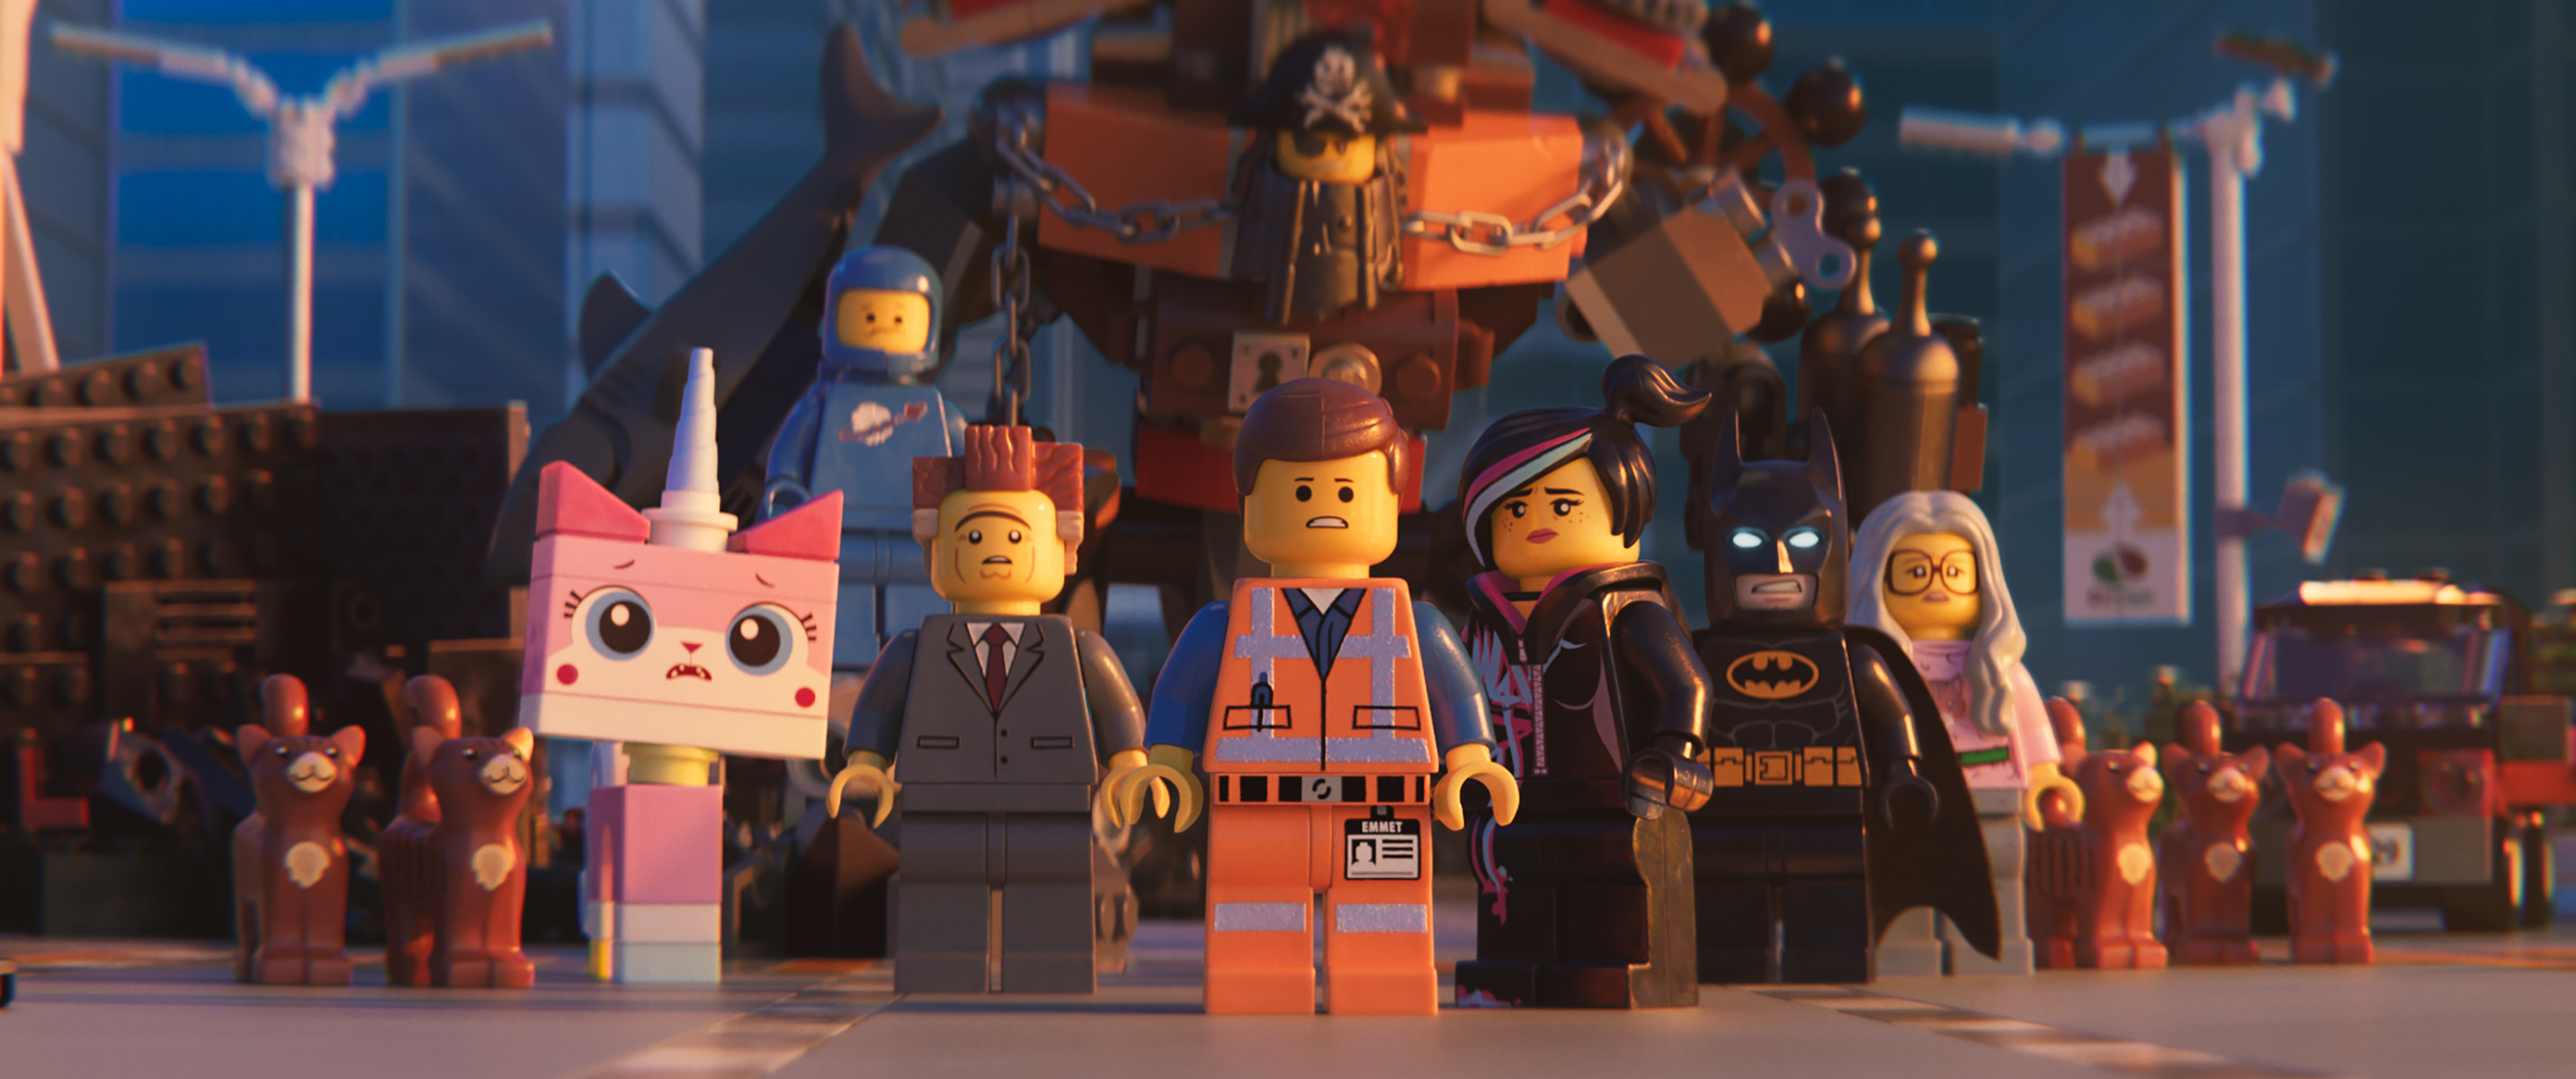 cry Alleviation novel The Lego Movie 2: The Second Part - Meet the cast | Gallery | Wonderwall.com